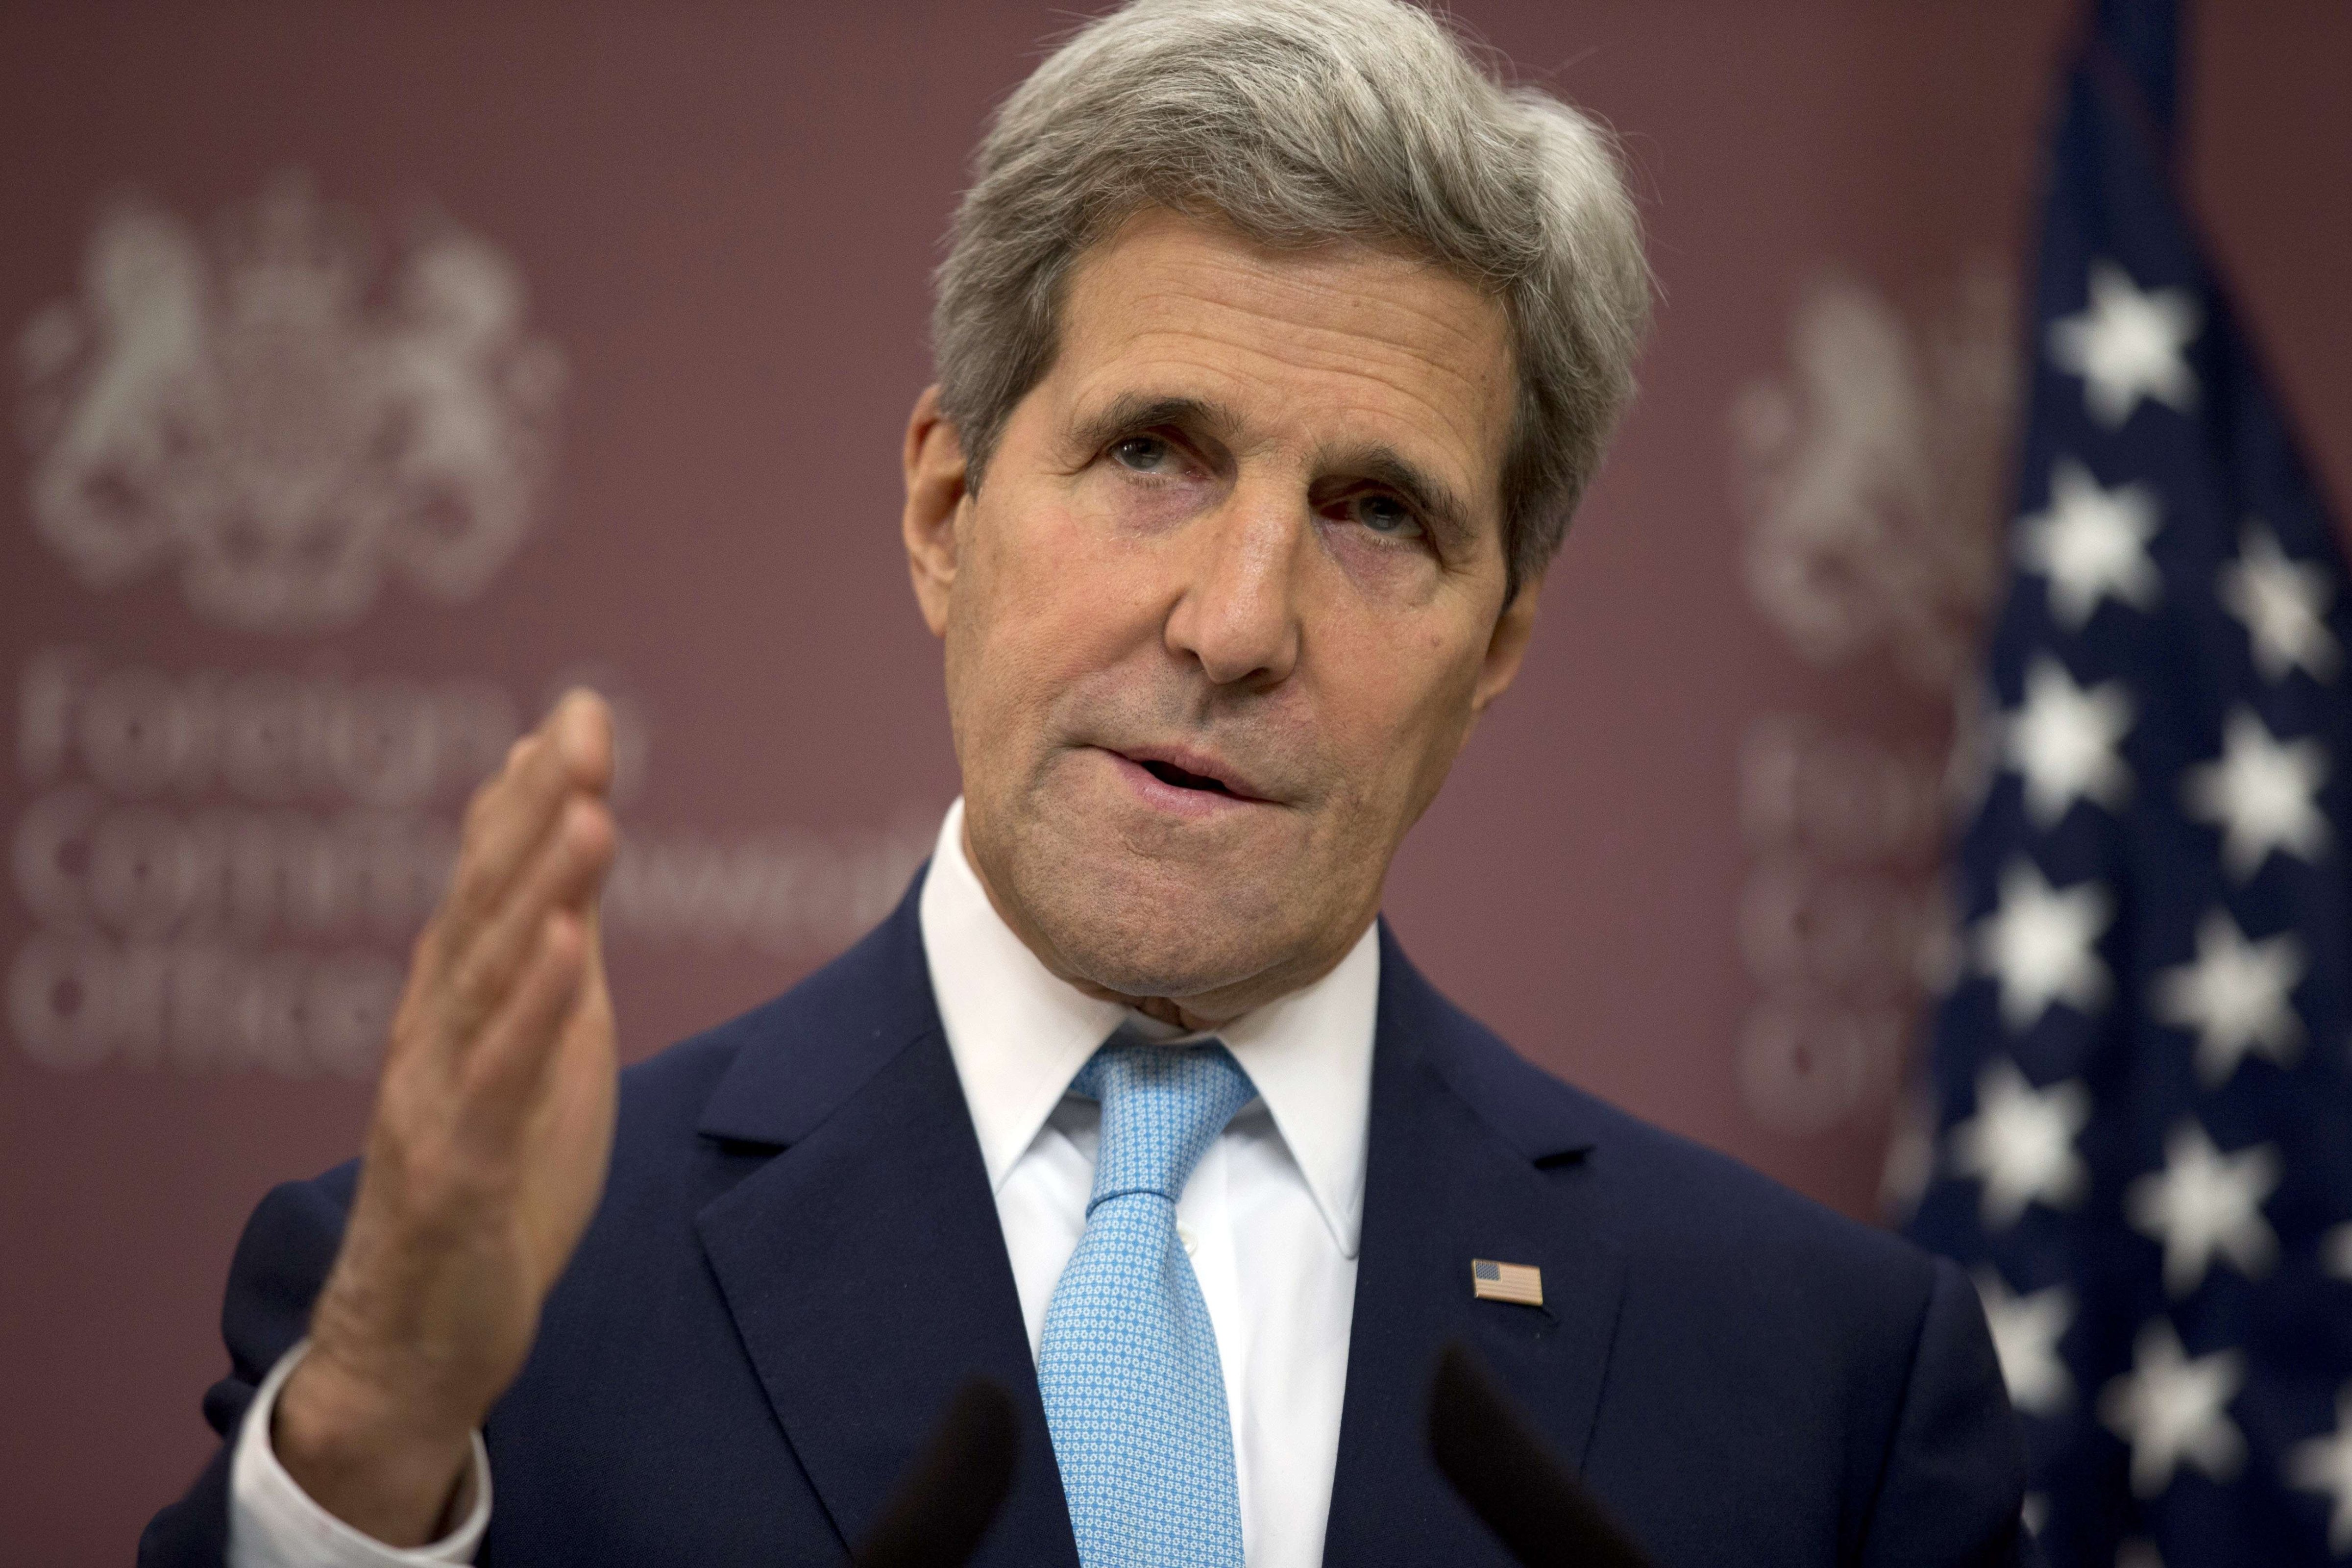 U.S. Secretary of State John Kerry speaks during a press conference following the Friends of Syria meeting in London on May 15, 2014. (Matt Dunham—AFP/Getty Images)